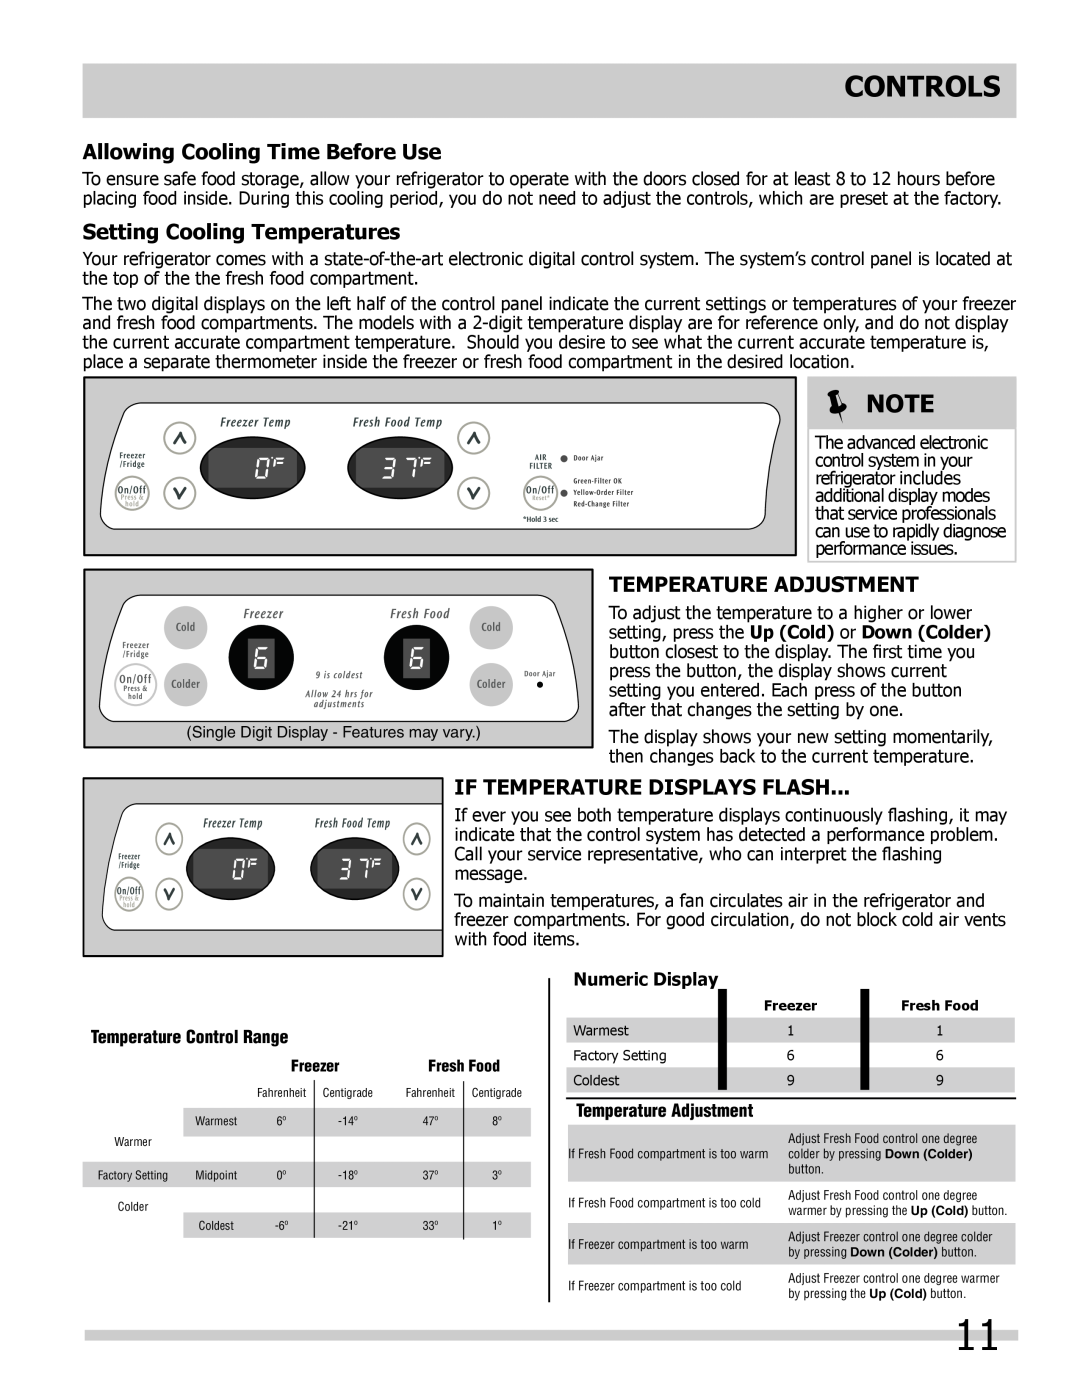 Frigidaire FFUS2613LE Allowing Cooling Time Before Use, Setting Cooling Temperatures, Temperature Adjustment, Controls 